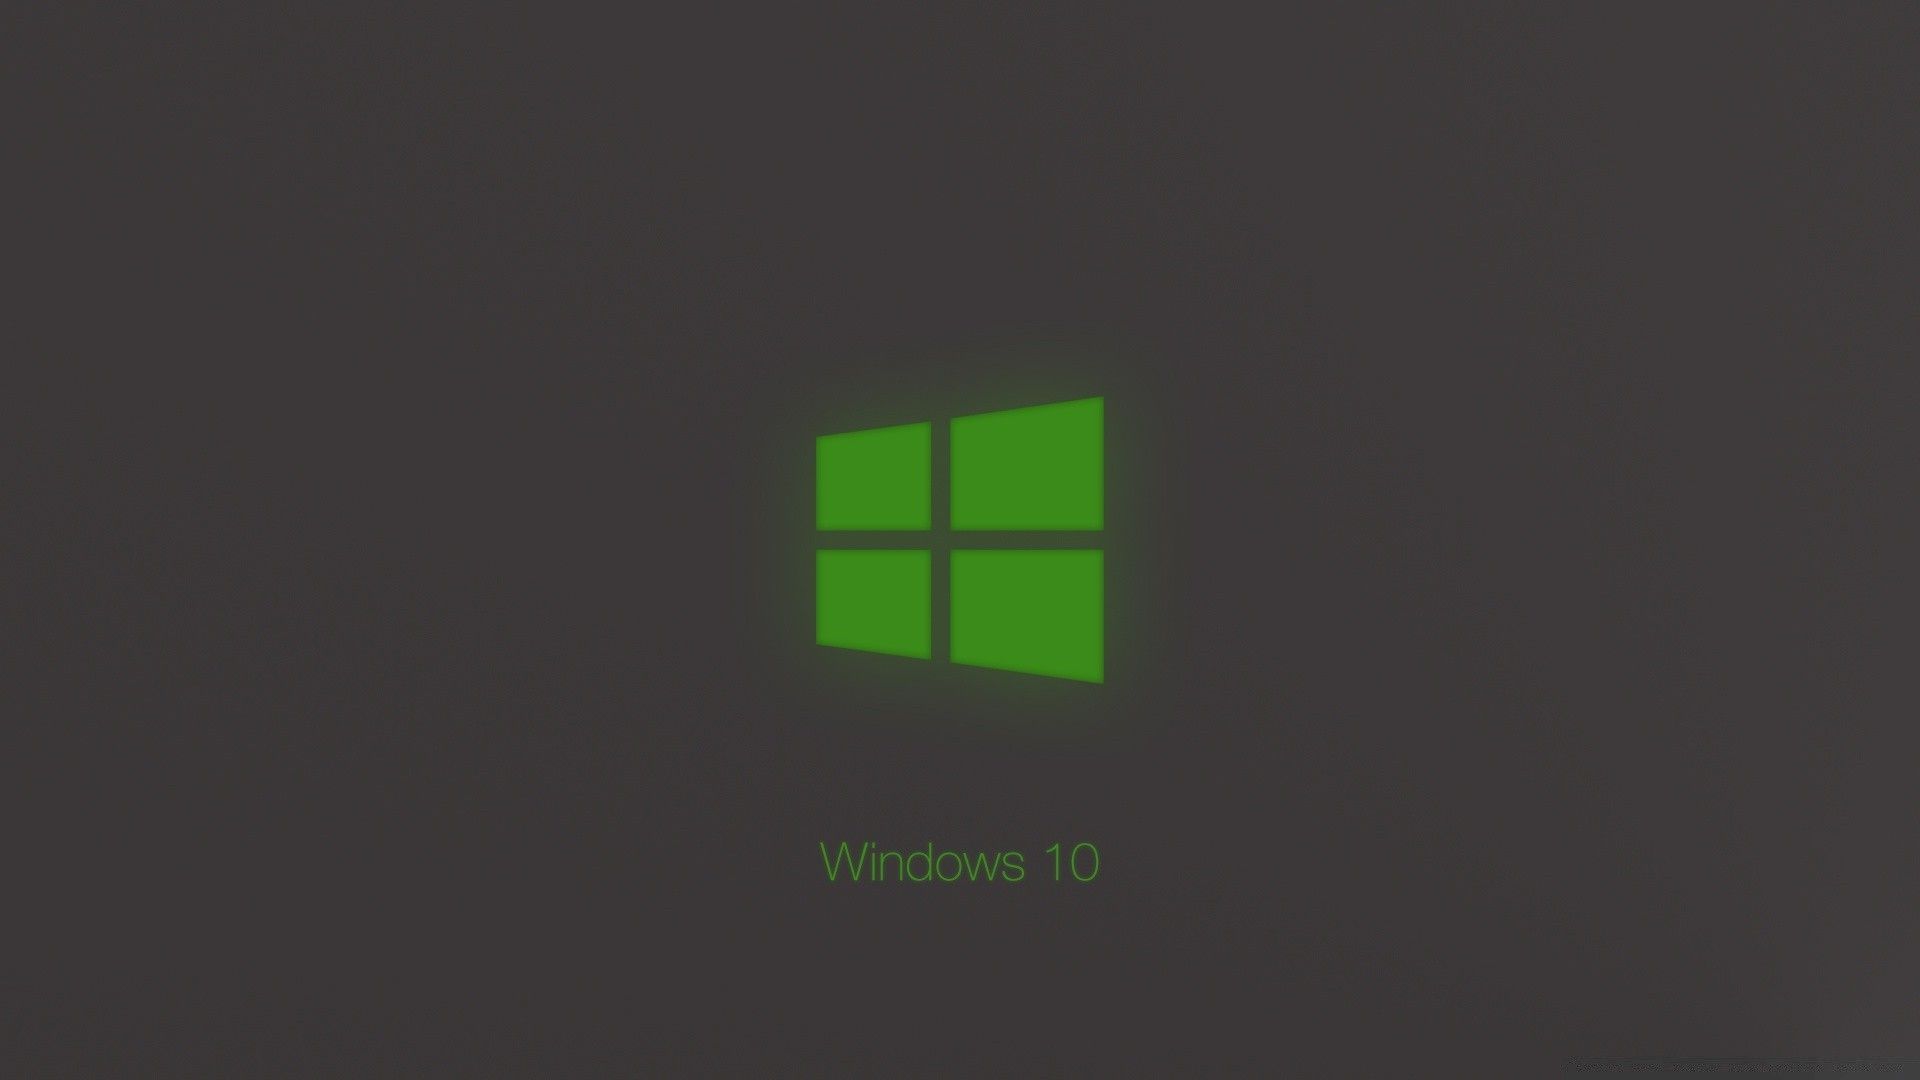 Windows 10 Technical Preview Green Glow